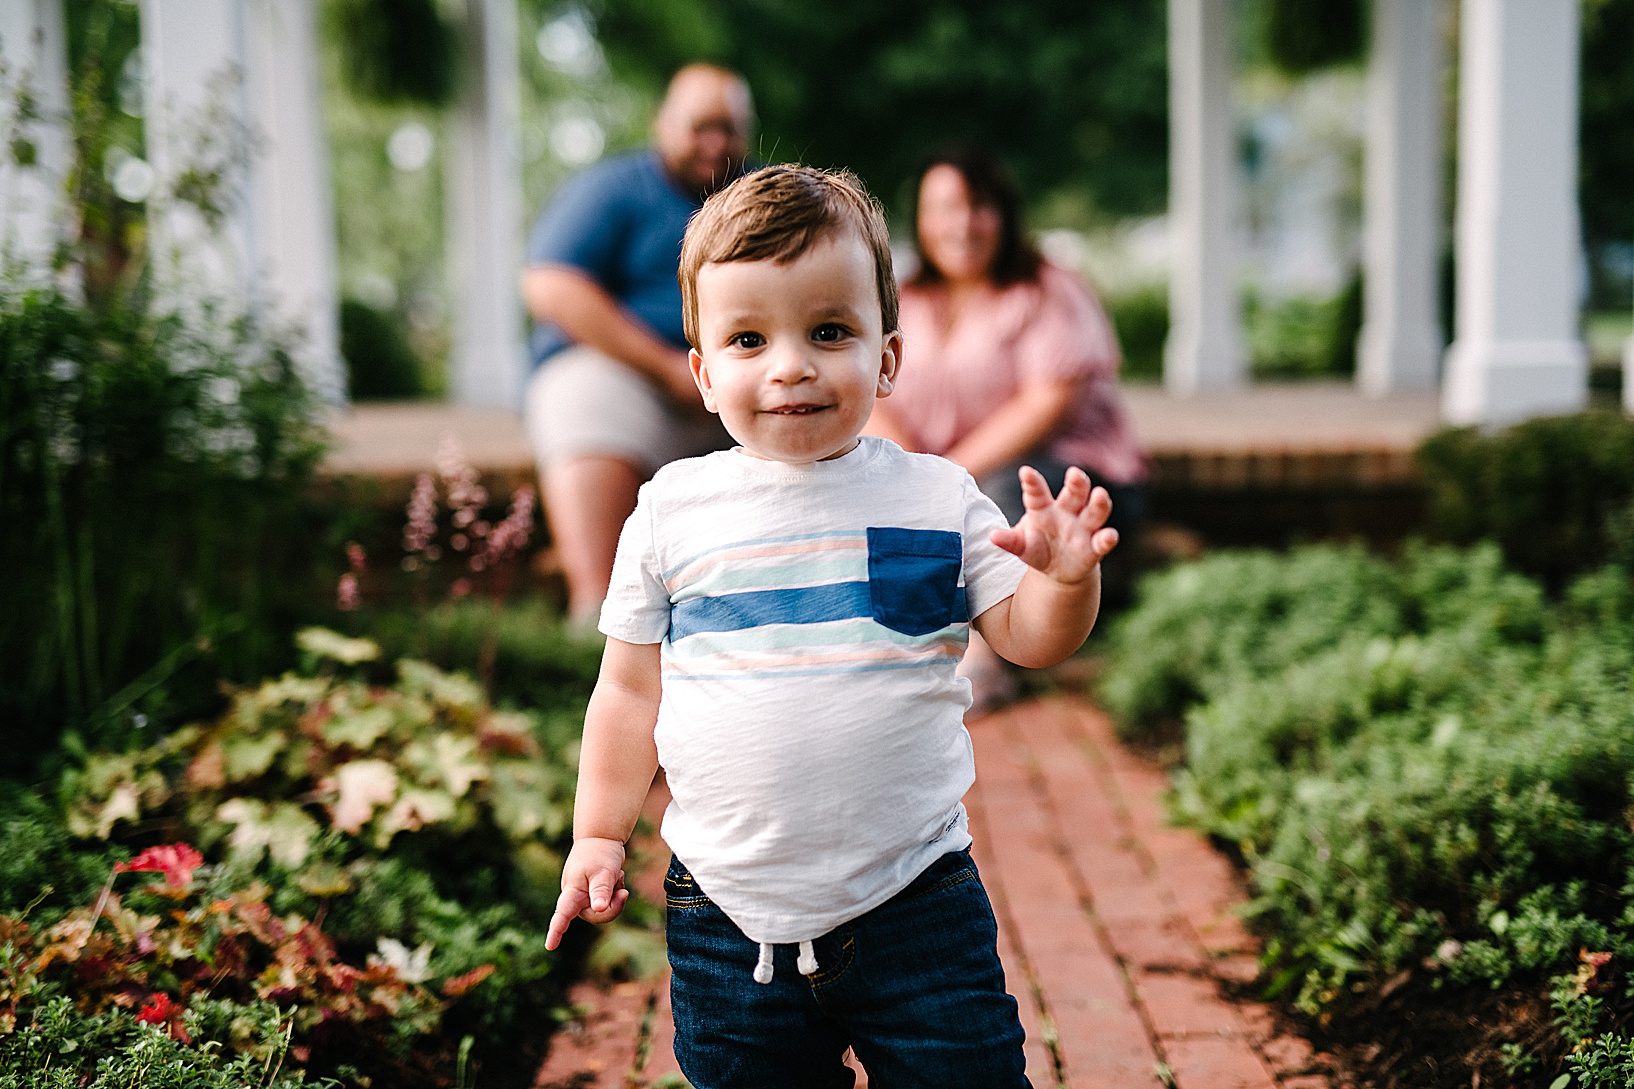 Young boy walks down a brick pathway smiling while his parents watch him in the background.